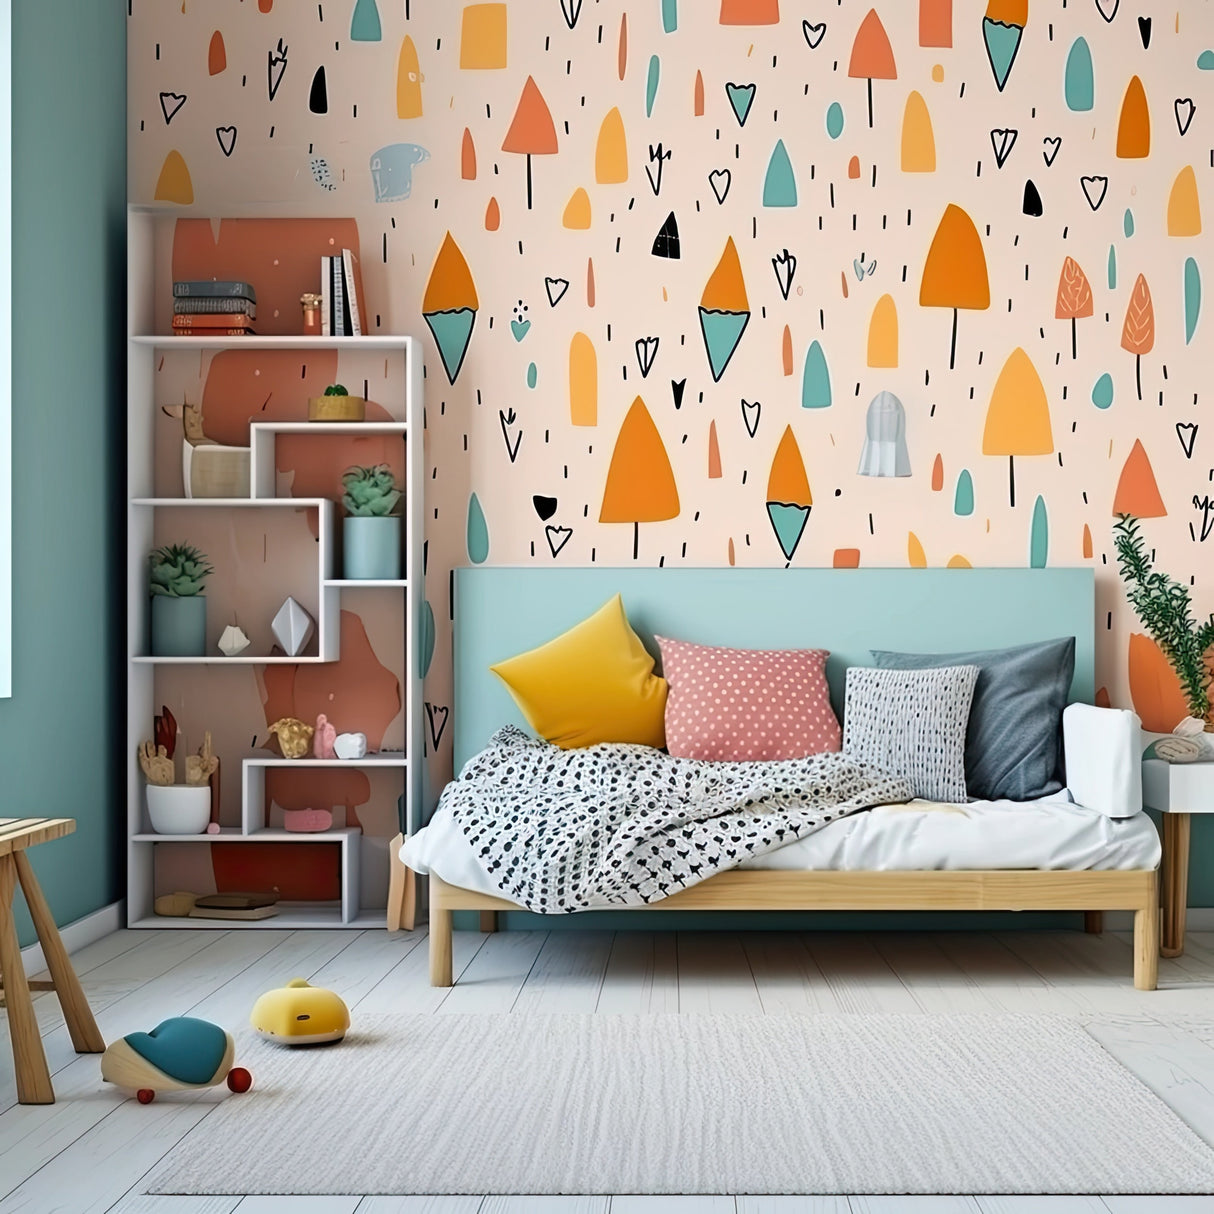 Custom Wallpaper Decal - Design Your Own Personalized Wallpaper Stickers